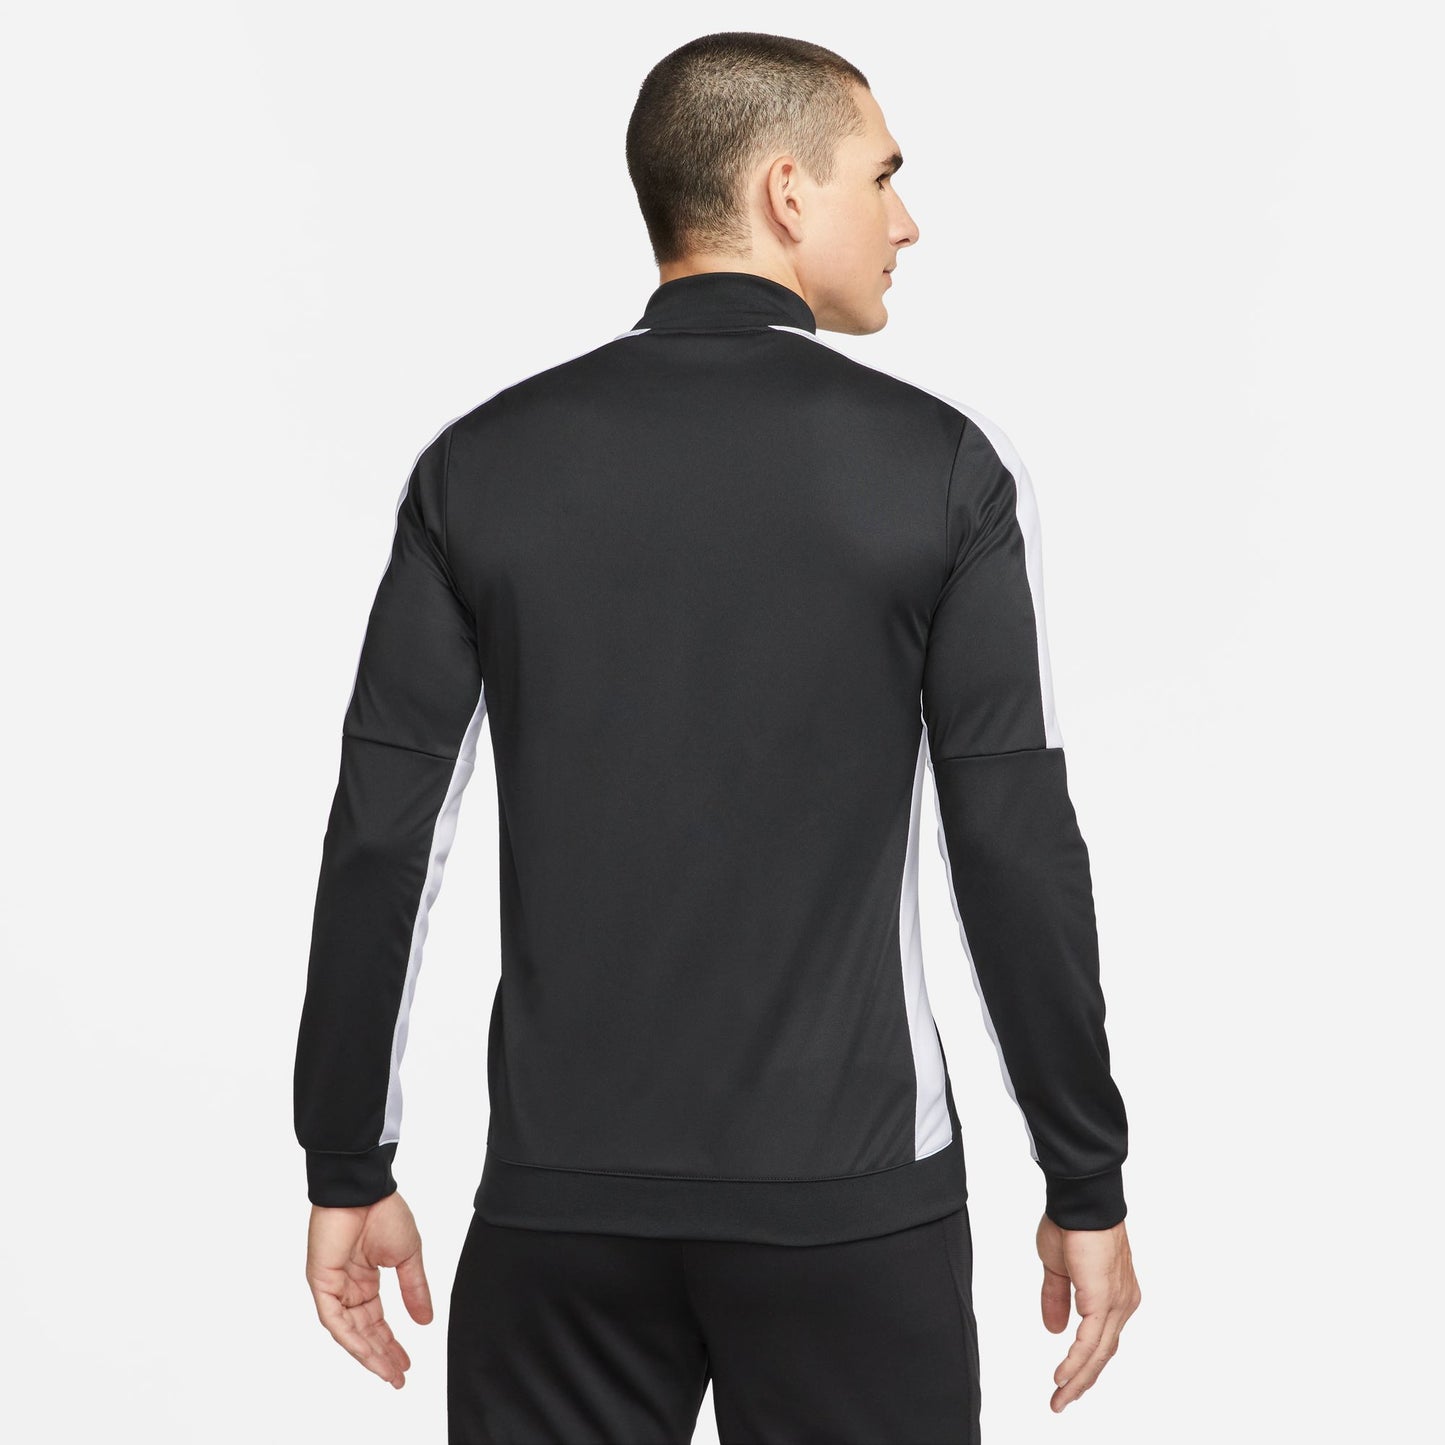 THE PRO PROJECT NIKE TRACK JACKET - MENS